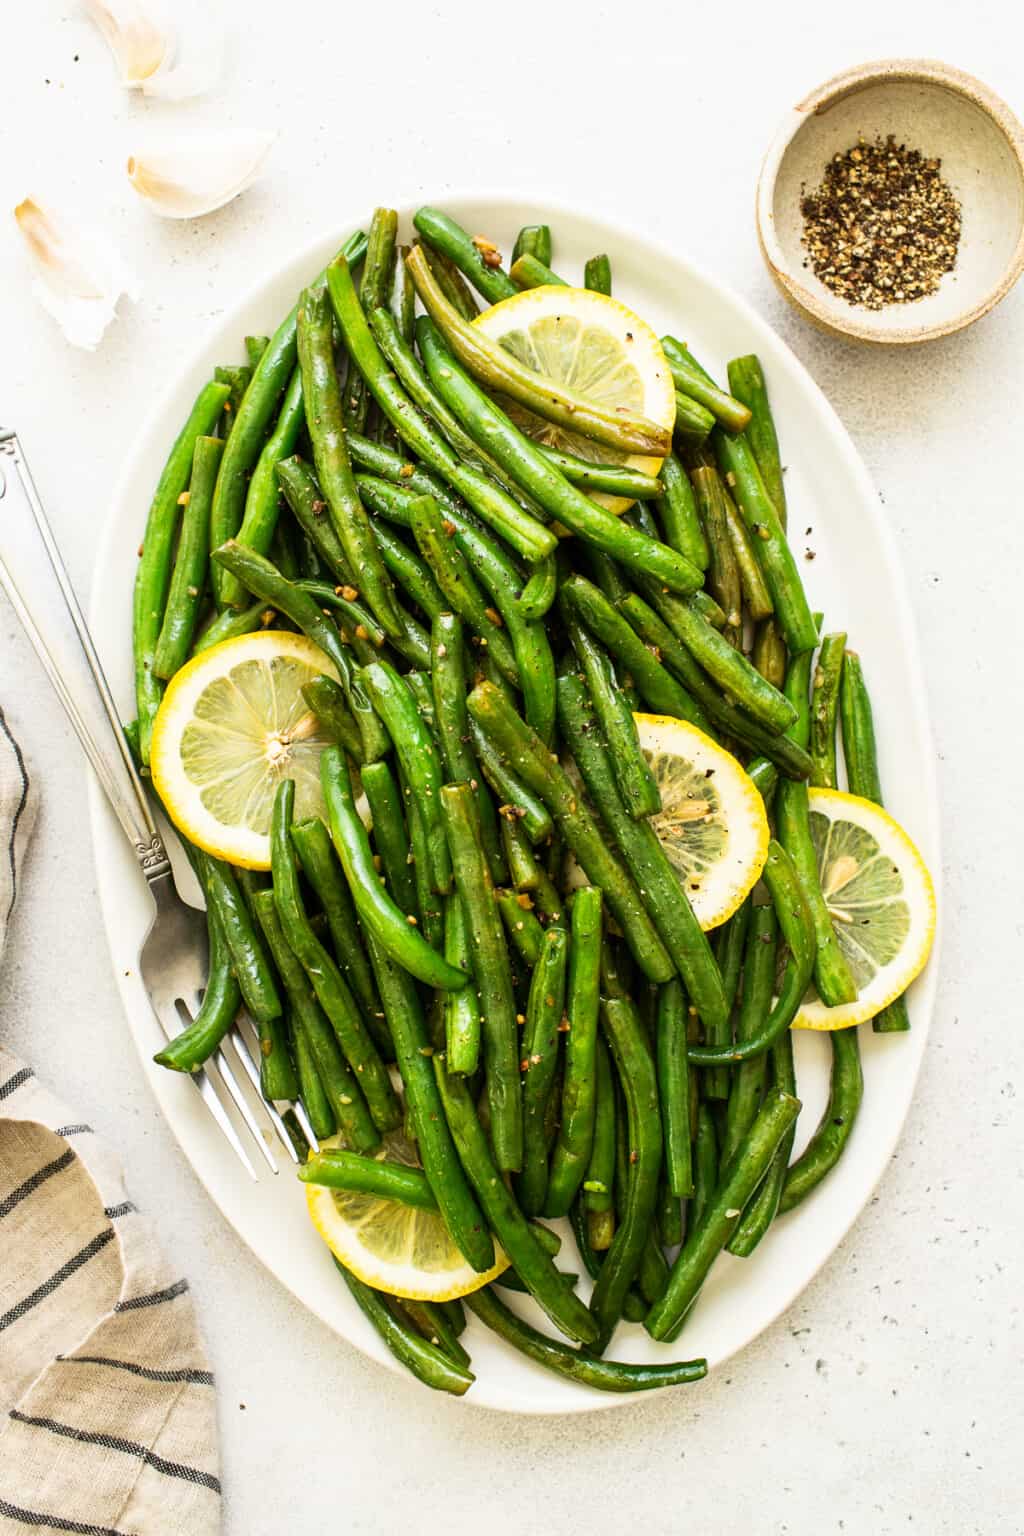 Sautéed Green Beans - Fit Foodie Finds